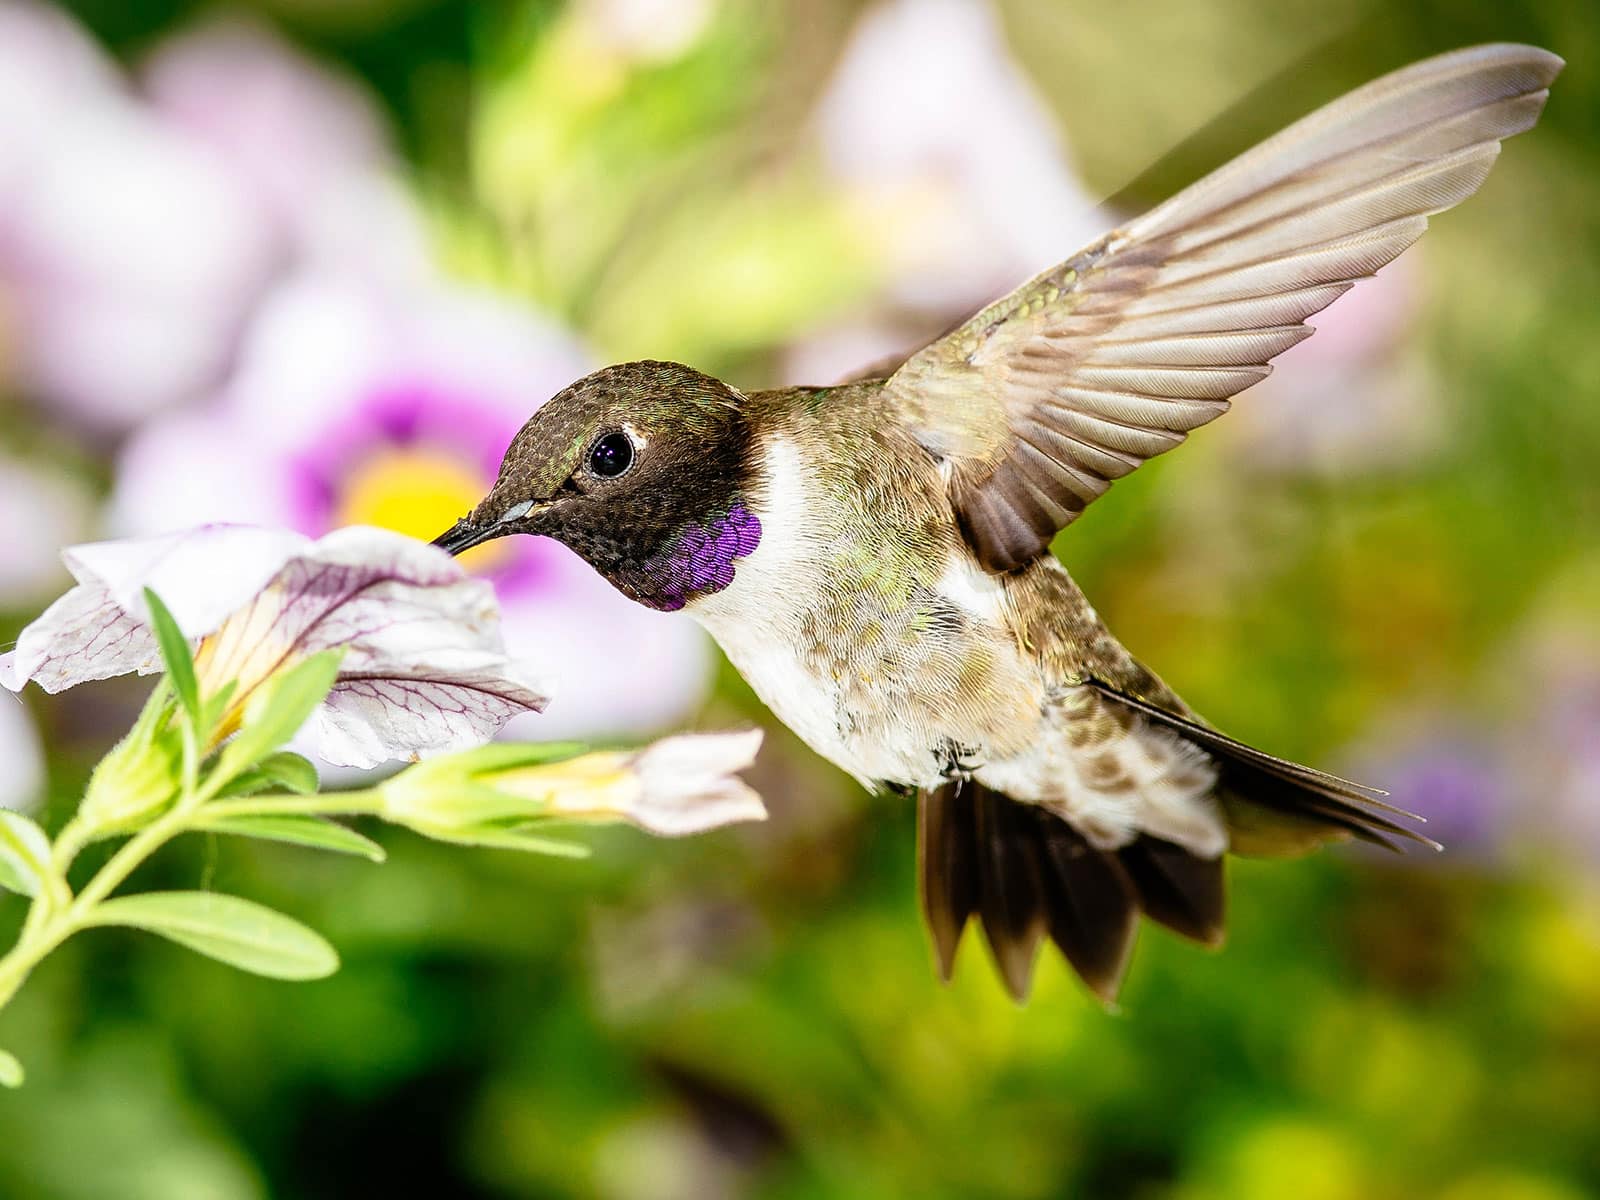 Black-chinned hummingbird feeding on a white flower while in flight